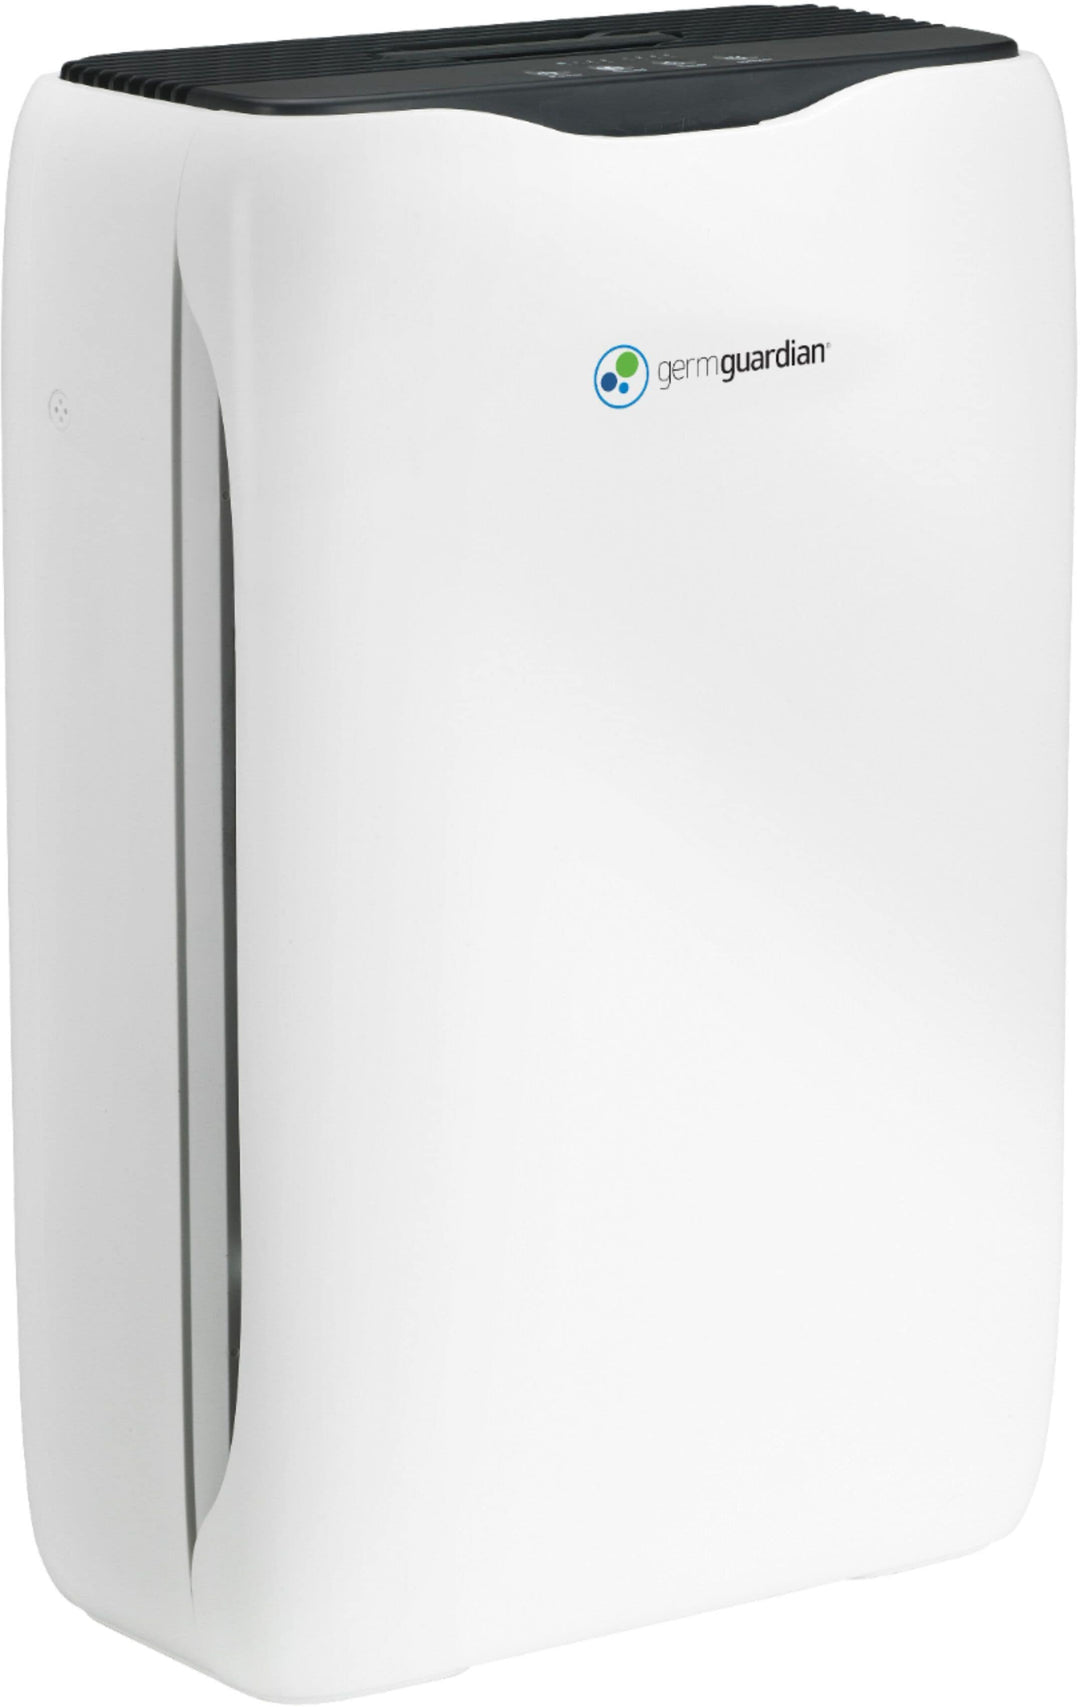 GermGuardian - 151 Sq. Ft Console Air Purifier - White_4